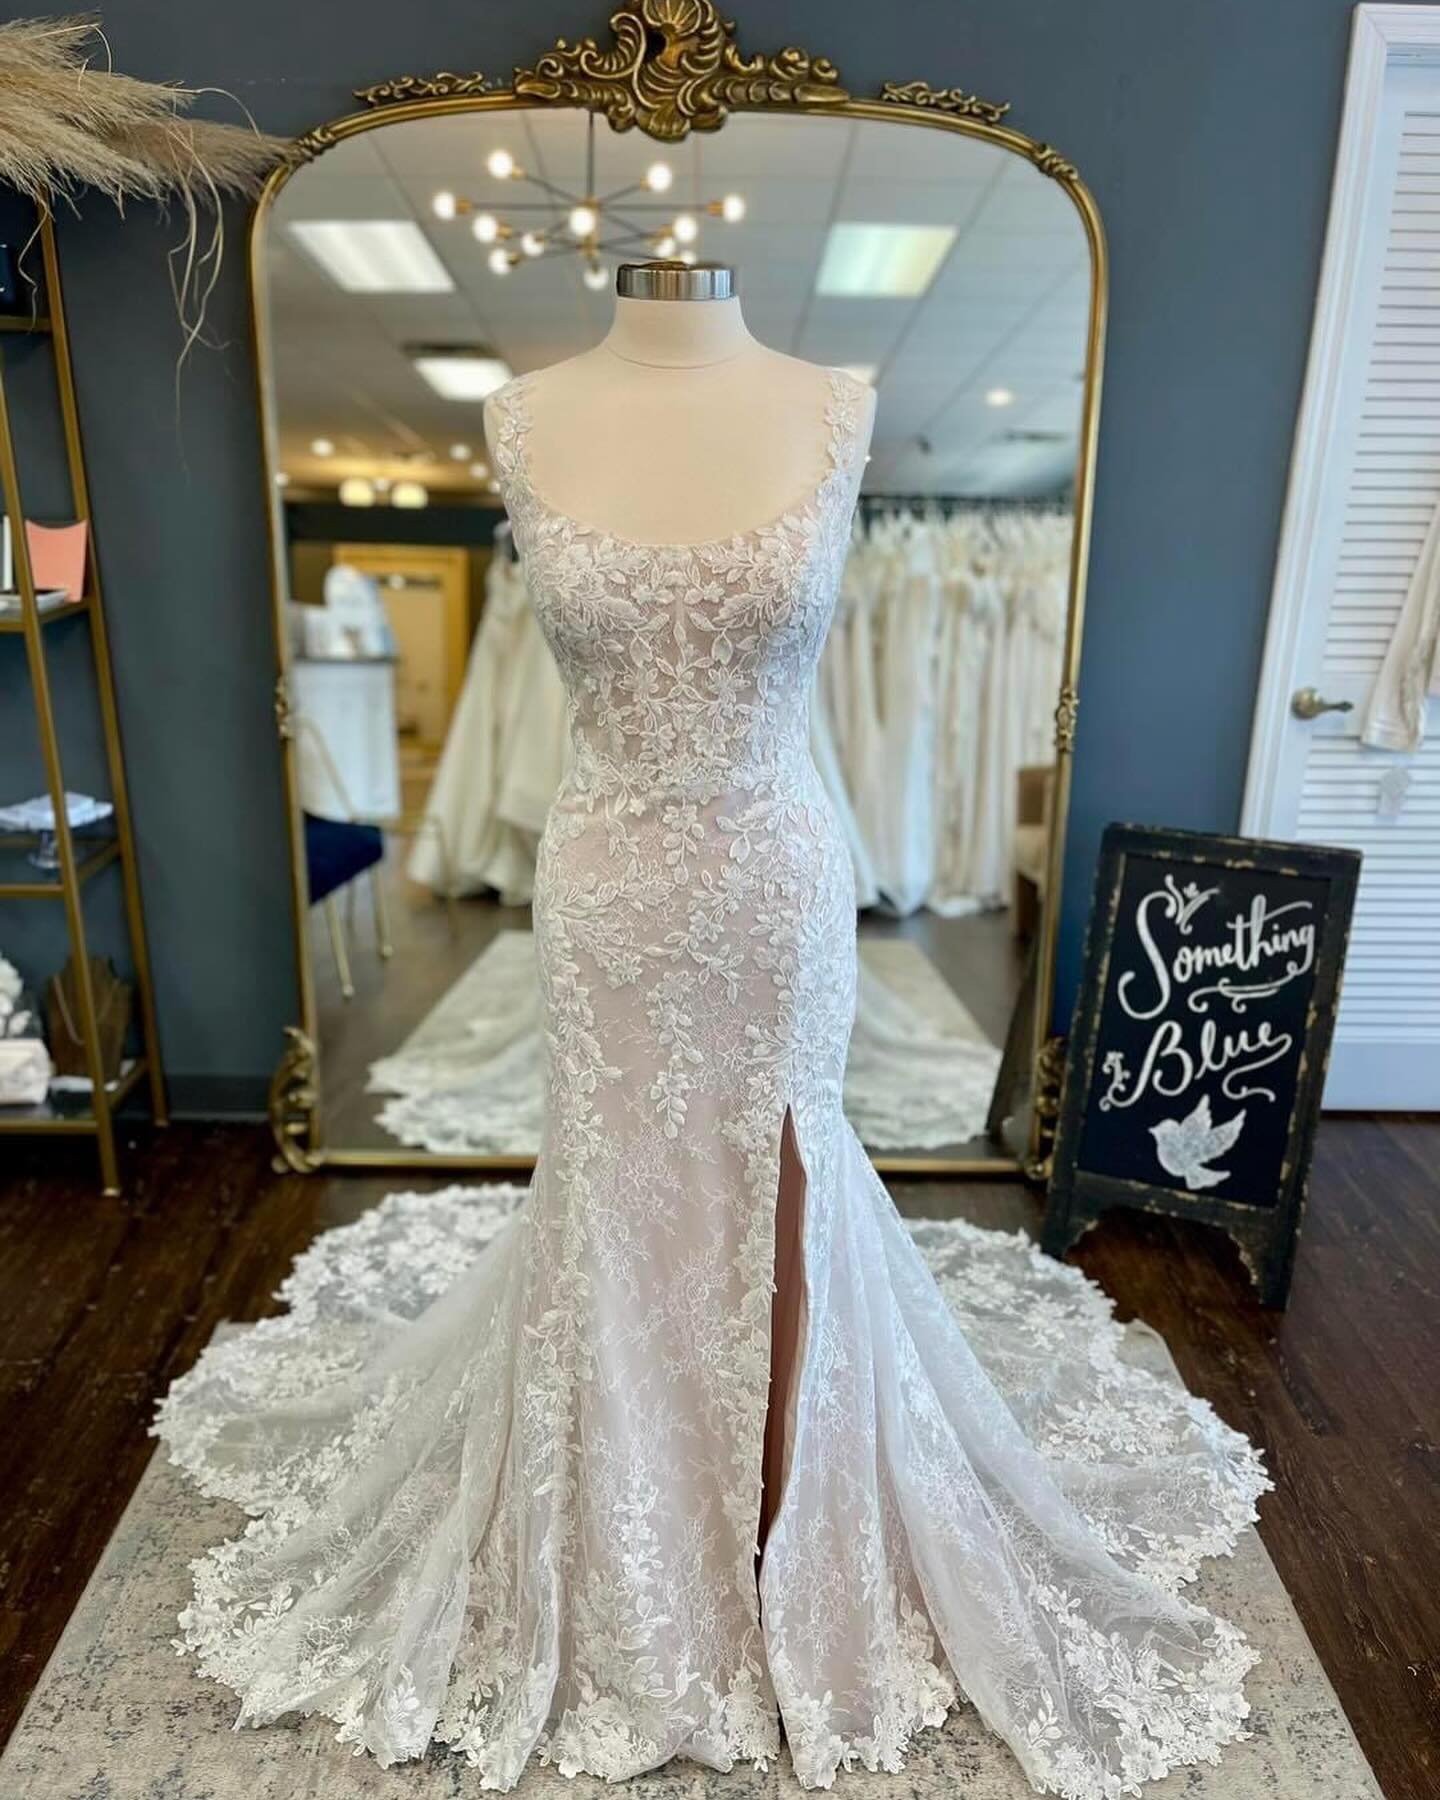 Another brand new beauty just in time for #WeddingGownWednesday! 

This stunning new gown features a scoop neckline, lots of gorgeous sparkling lace and one beautiful train! The slit in the skirt adds the perfect amount of sass! You can try this gown